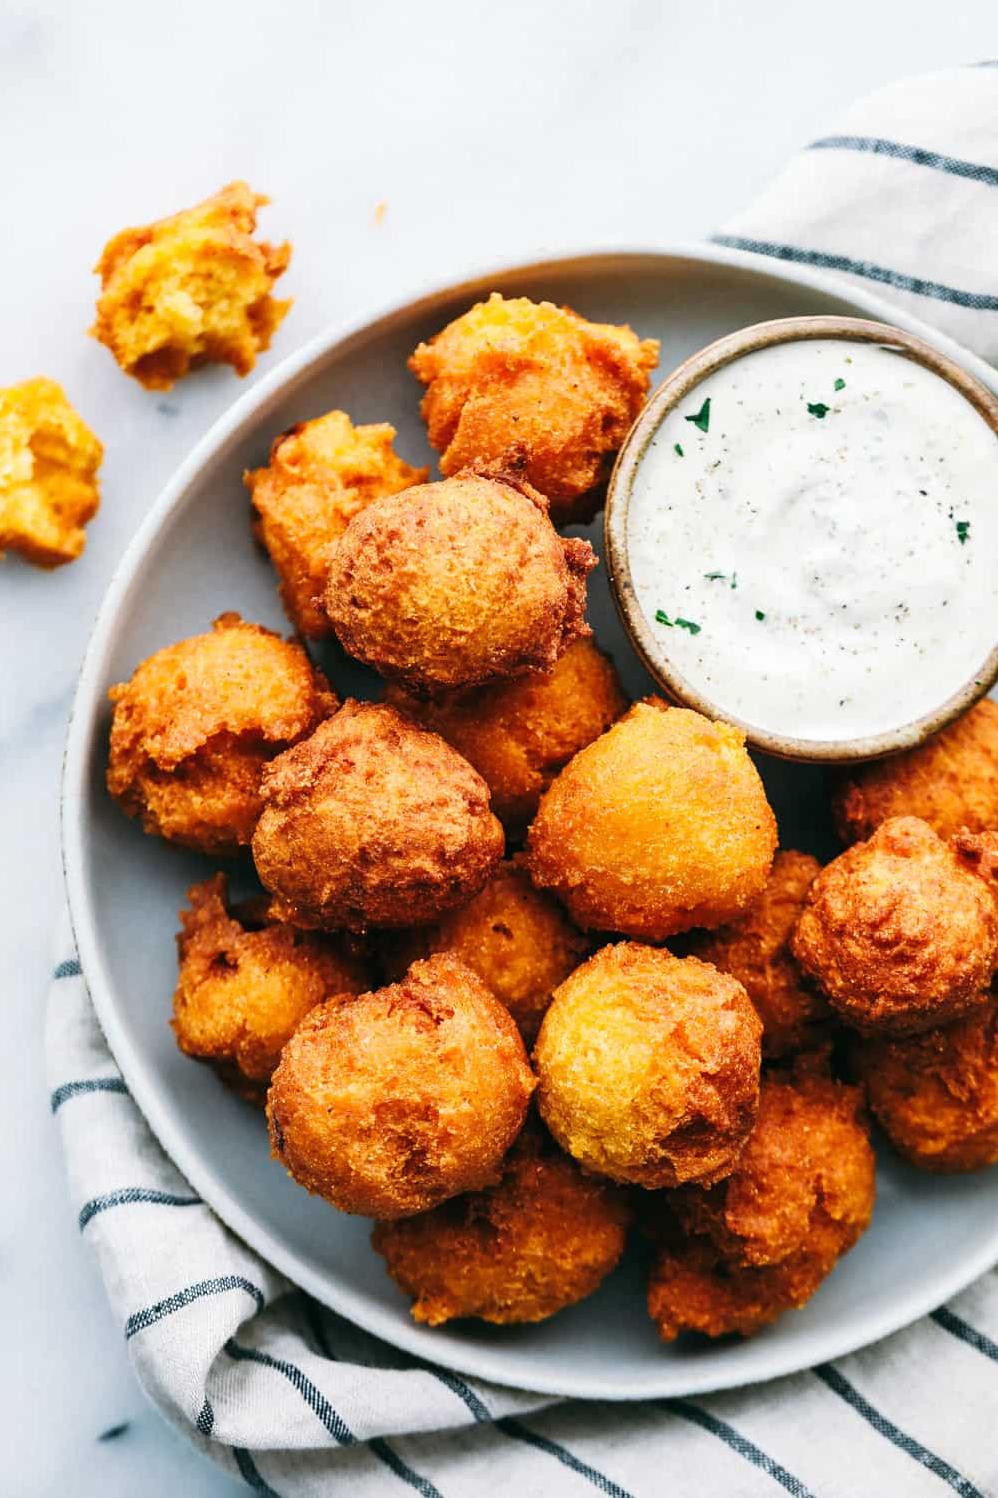  These hush puppies are the perfect sidekick to your fried chicken!